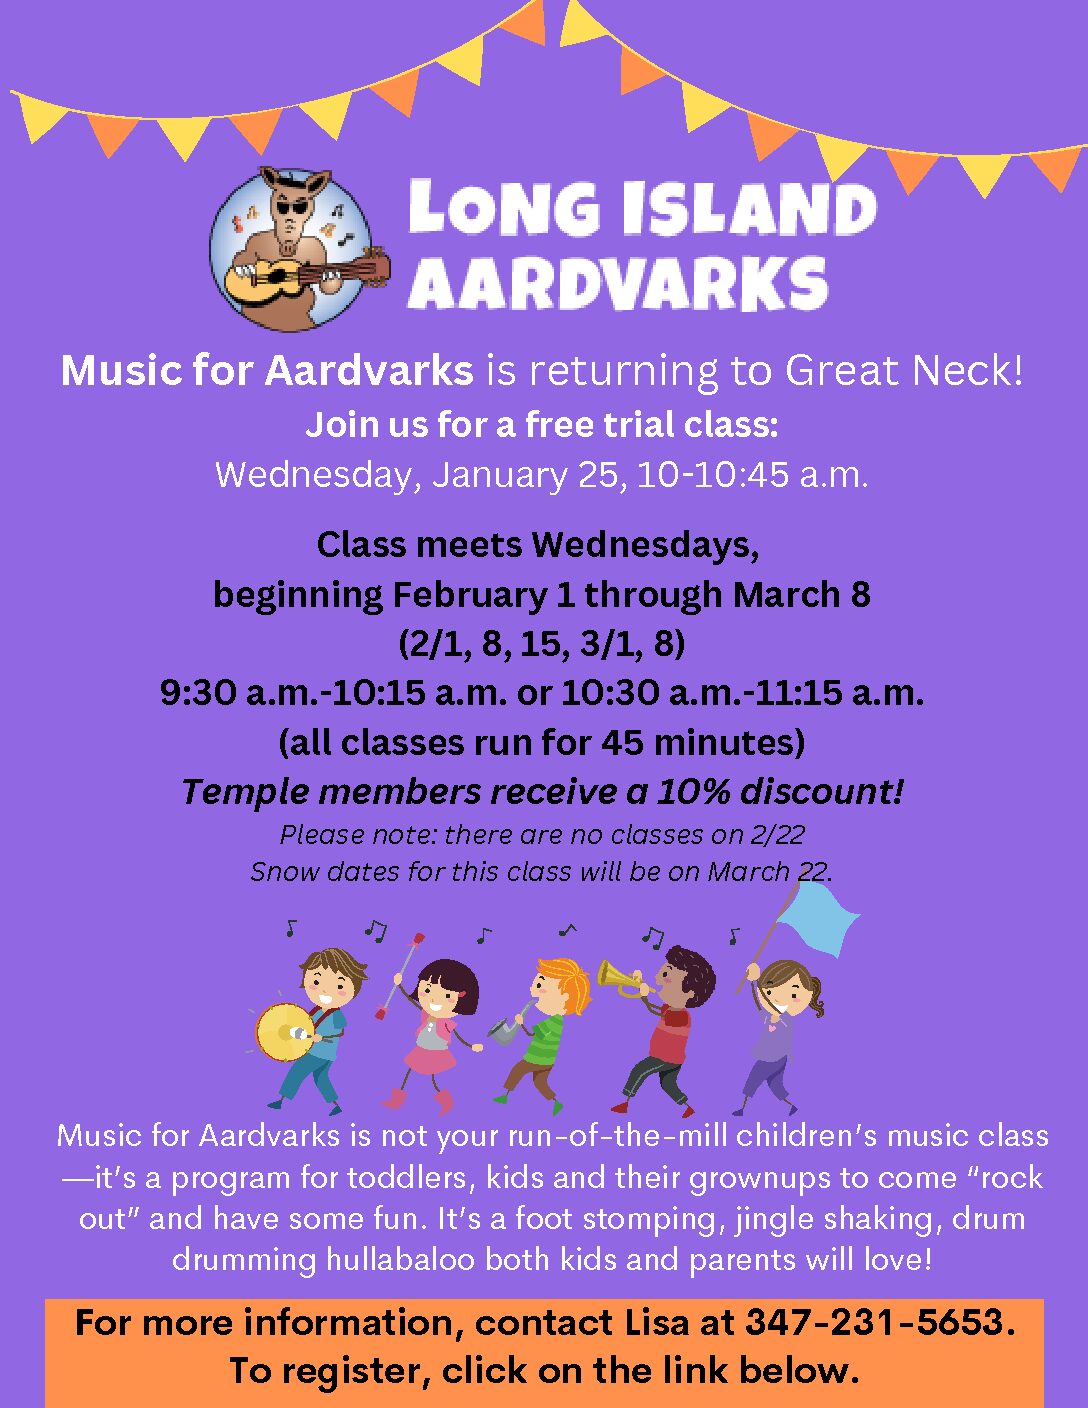 Music for Aardvarks 2/1-3/8 (no classes on 2/22)